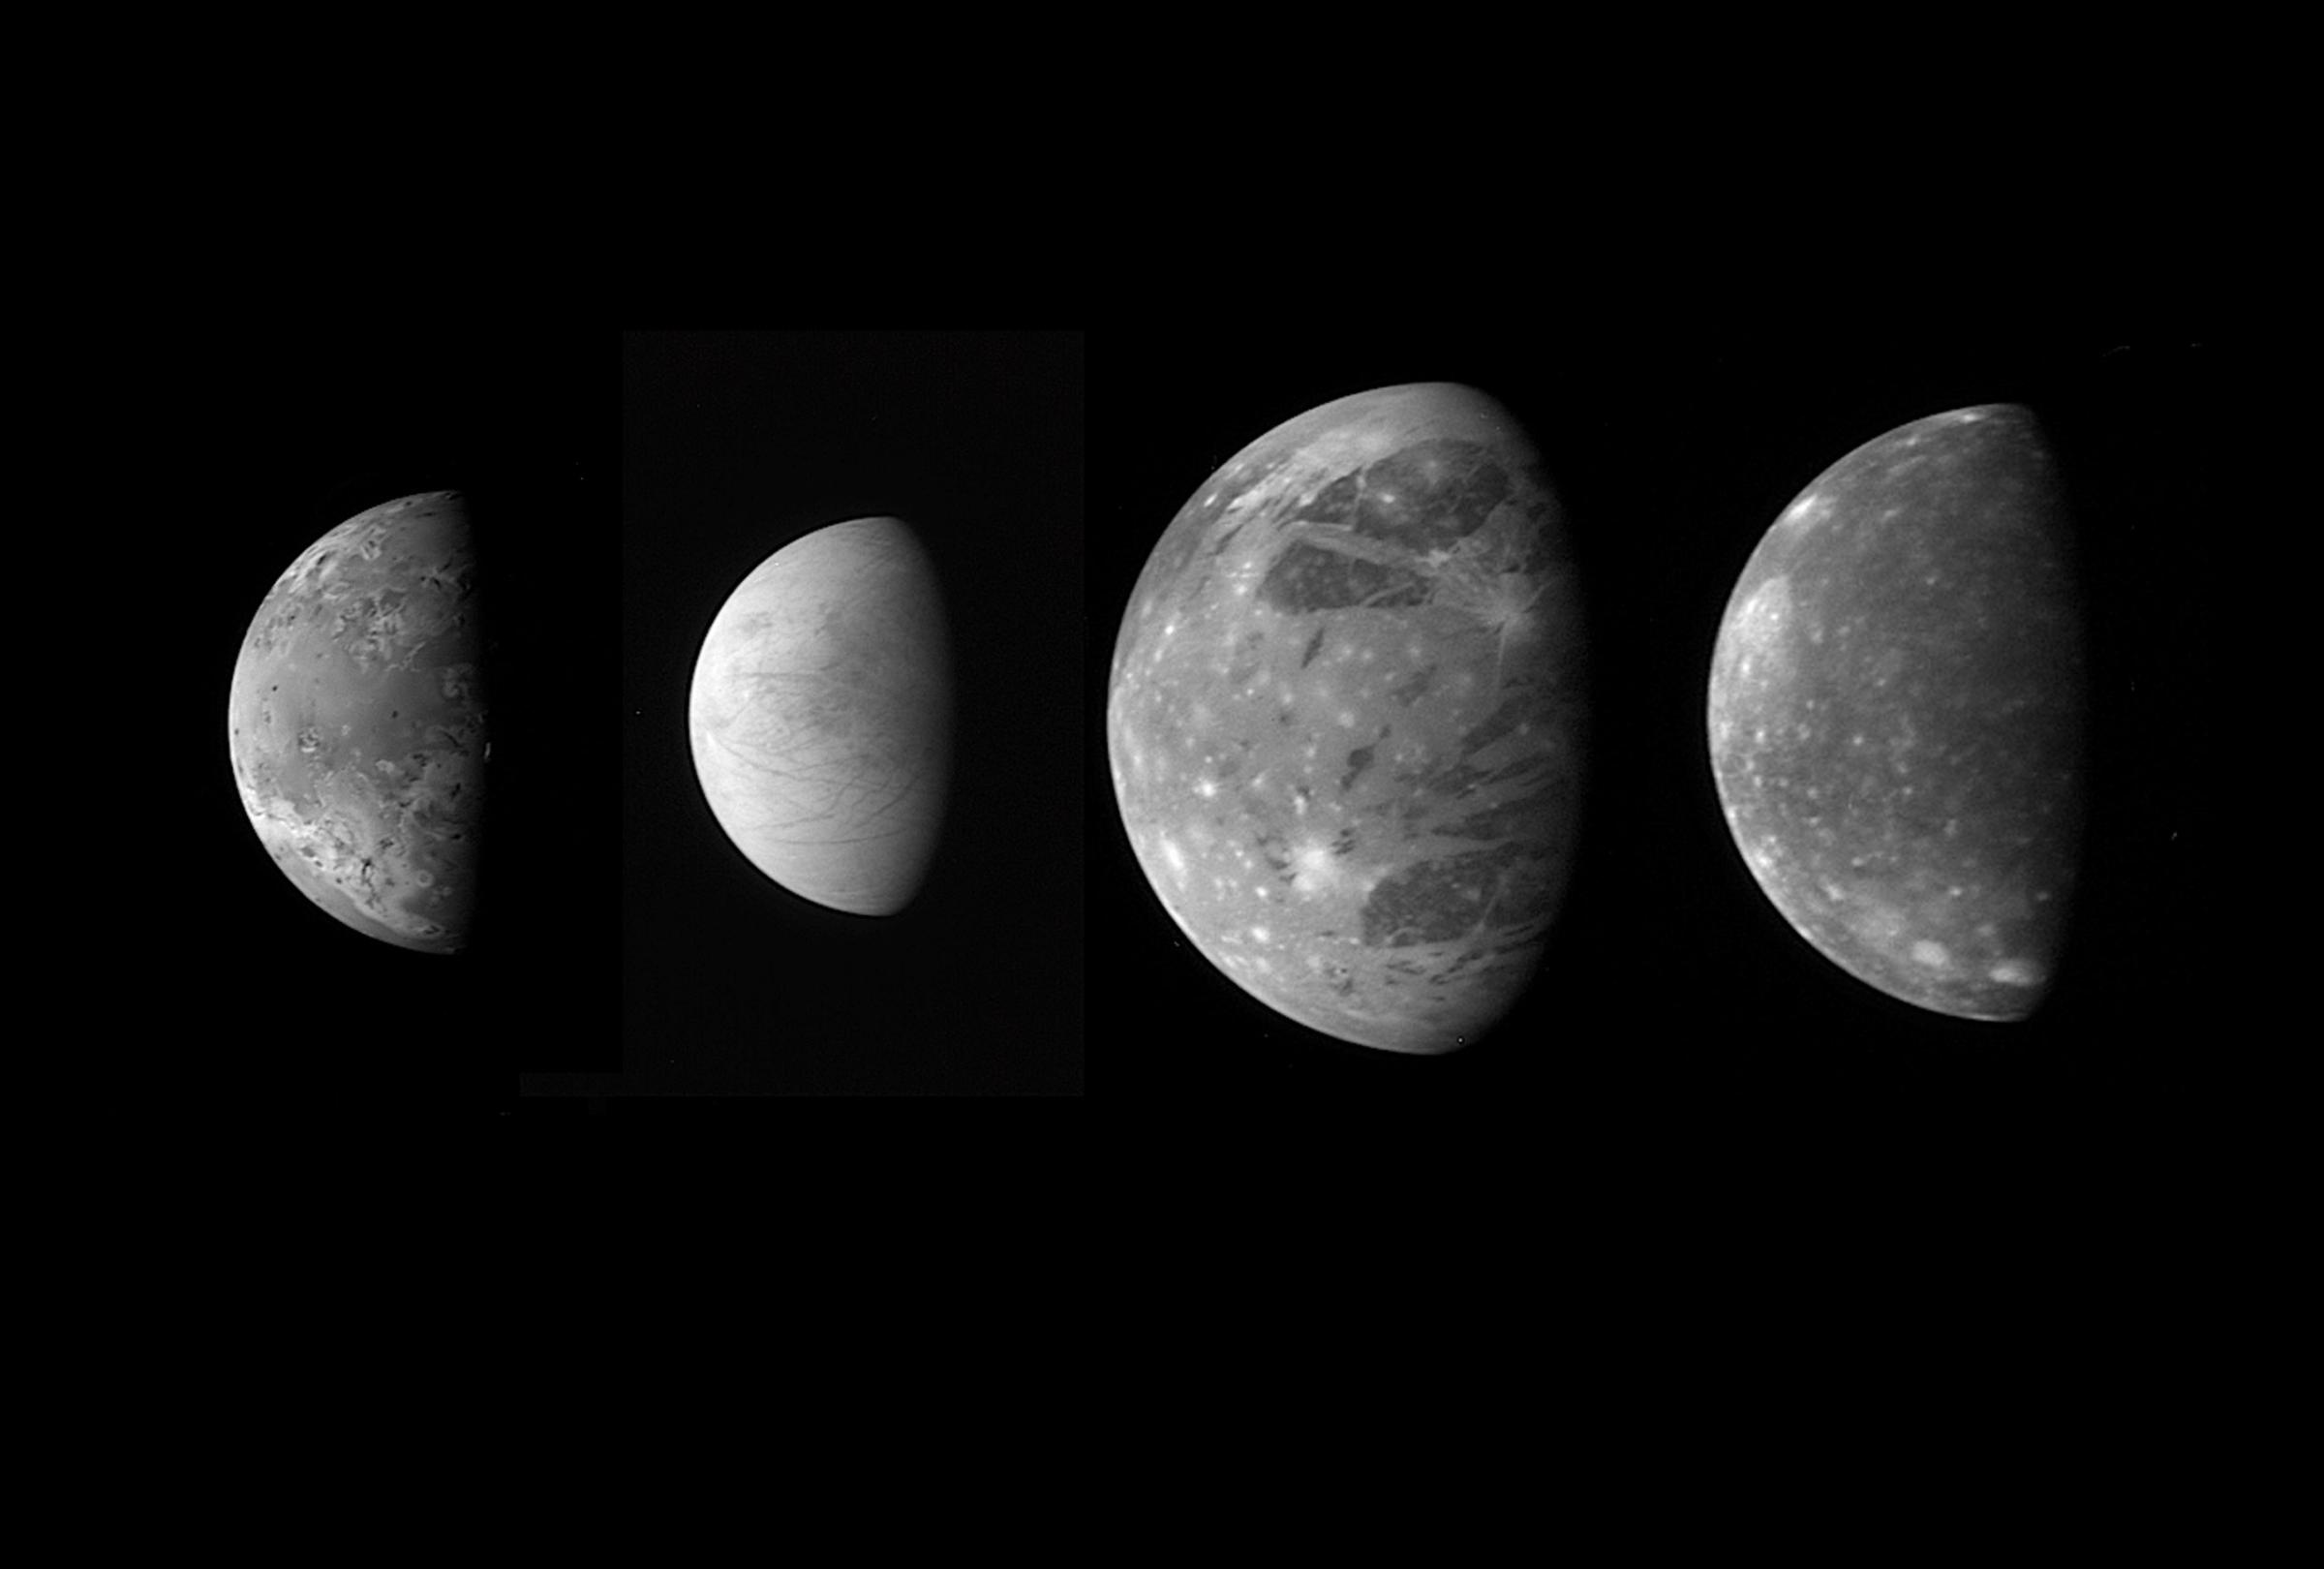 Jupiter's Moons: Family PortraitRelease Date: May 1, 2007Keywords: Callisto, crater, Europa, Galilean satellite, Ganymede, Io, Jupiter, LORRI, moon(s)This montage shows the best views of Jupiter's four large and diverse "Galilean" satellites as seen by the Long Range Reconnaissance Imager (LORRI) on the New Horizons spacecraft during its flyby of Jupiter in late February 2007. The four moons are, from left to right: Io, Europa, Ganymede and Callisto. The images have been scaled to represent the true relative sizes of the four moons and are arranged in their order from Jupiter.Io, 3,640 kilometers (2,260 miles) in diameter, was imaged at 03:50 Universal Time on February 28 from a range of 2.7 million kilometers (1.7 million miles). The original image scale was 13 kilometers per pixel, and the image is centered at Io coordinates 6 degrees south, 22 degrees west. Io is notable for its active volcanism, which New Horizons has studied extensively. Europa, 3,120 kilometers (1,938 miles) in diameter, was imaged at 01:28 Universal Time on February 28 from a range of 3 million kilometers (1.8 million miles). The original image scale was 15 kilometers per pixel, and the image is centered at Europa coordinates 6 degrees south, 347 degrees west. Europa's smooth, icy surface likely conceals an ocean of liquid water. New Horizons obtained data on Europa�s surface composition and imaged subtle surface features, and analysis of these data may provide new information about the ocean and the icy shell that covers it.New Horizons spied Ganymede, 5,262 kilometers (3,268 miles) in diameter, at 10:01 Universal Time on February 27 from 3.5 million kilometers (2.2 million miles) away. The original scale was 17 kilometers per pixel, and the image is centered at Ganymede coordinates 6 degrees south, 38 degrees west. Ganymede, the largest moon in the solar system, has a dirty ice surface cut by fractures and peppered by impact craters. New Horizons� infrared observations may prov